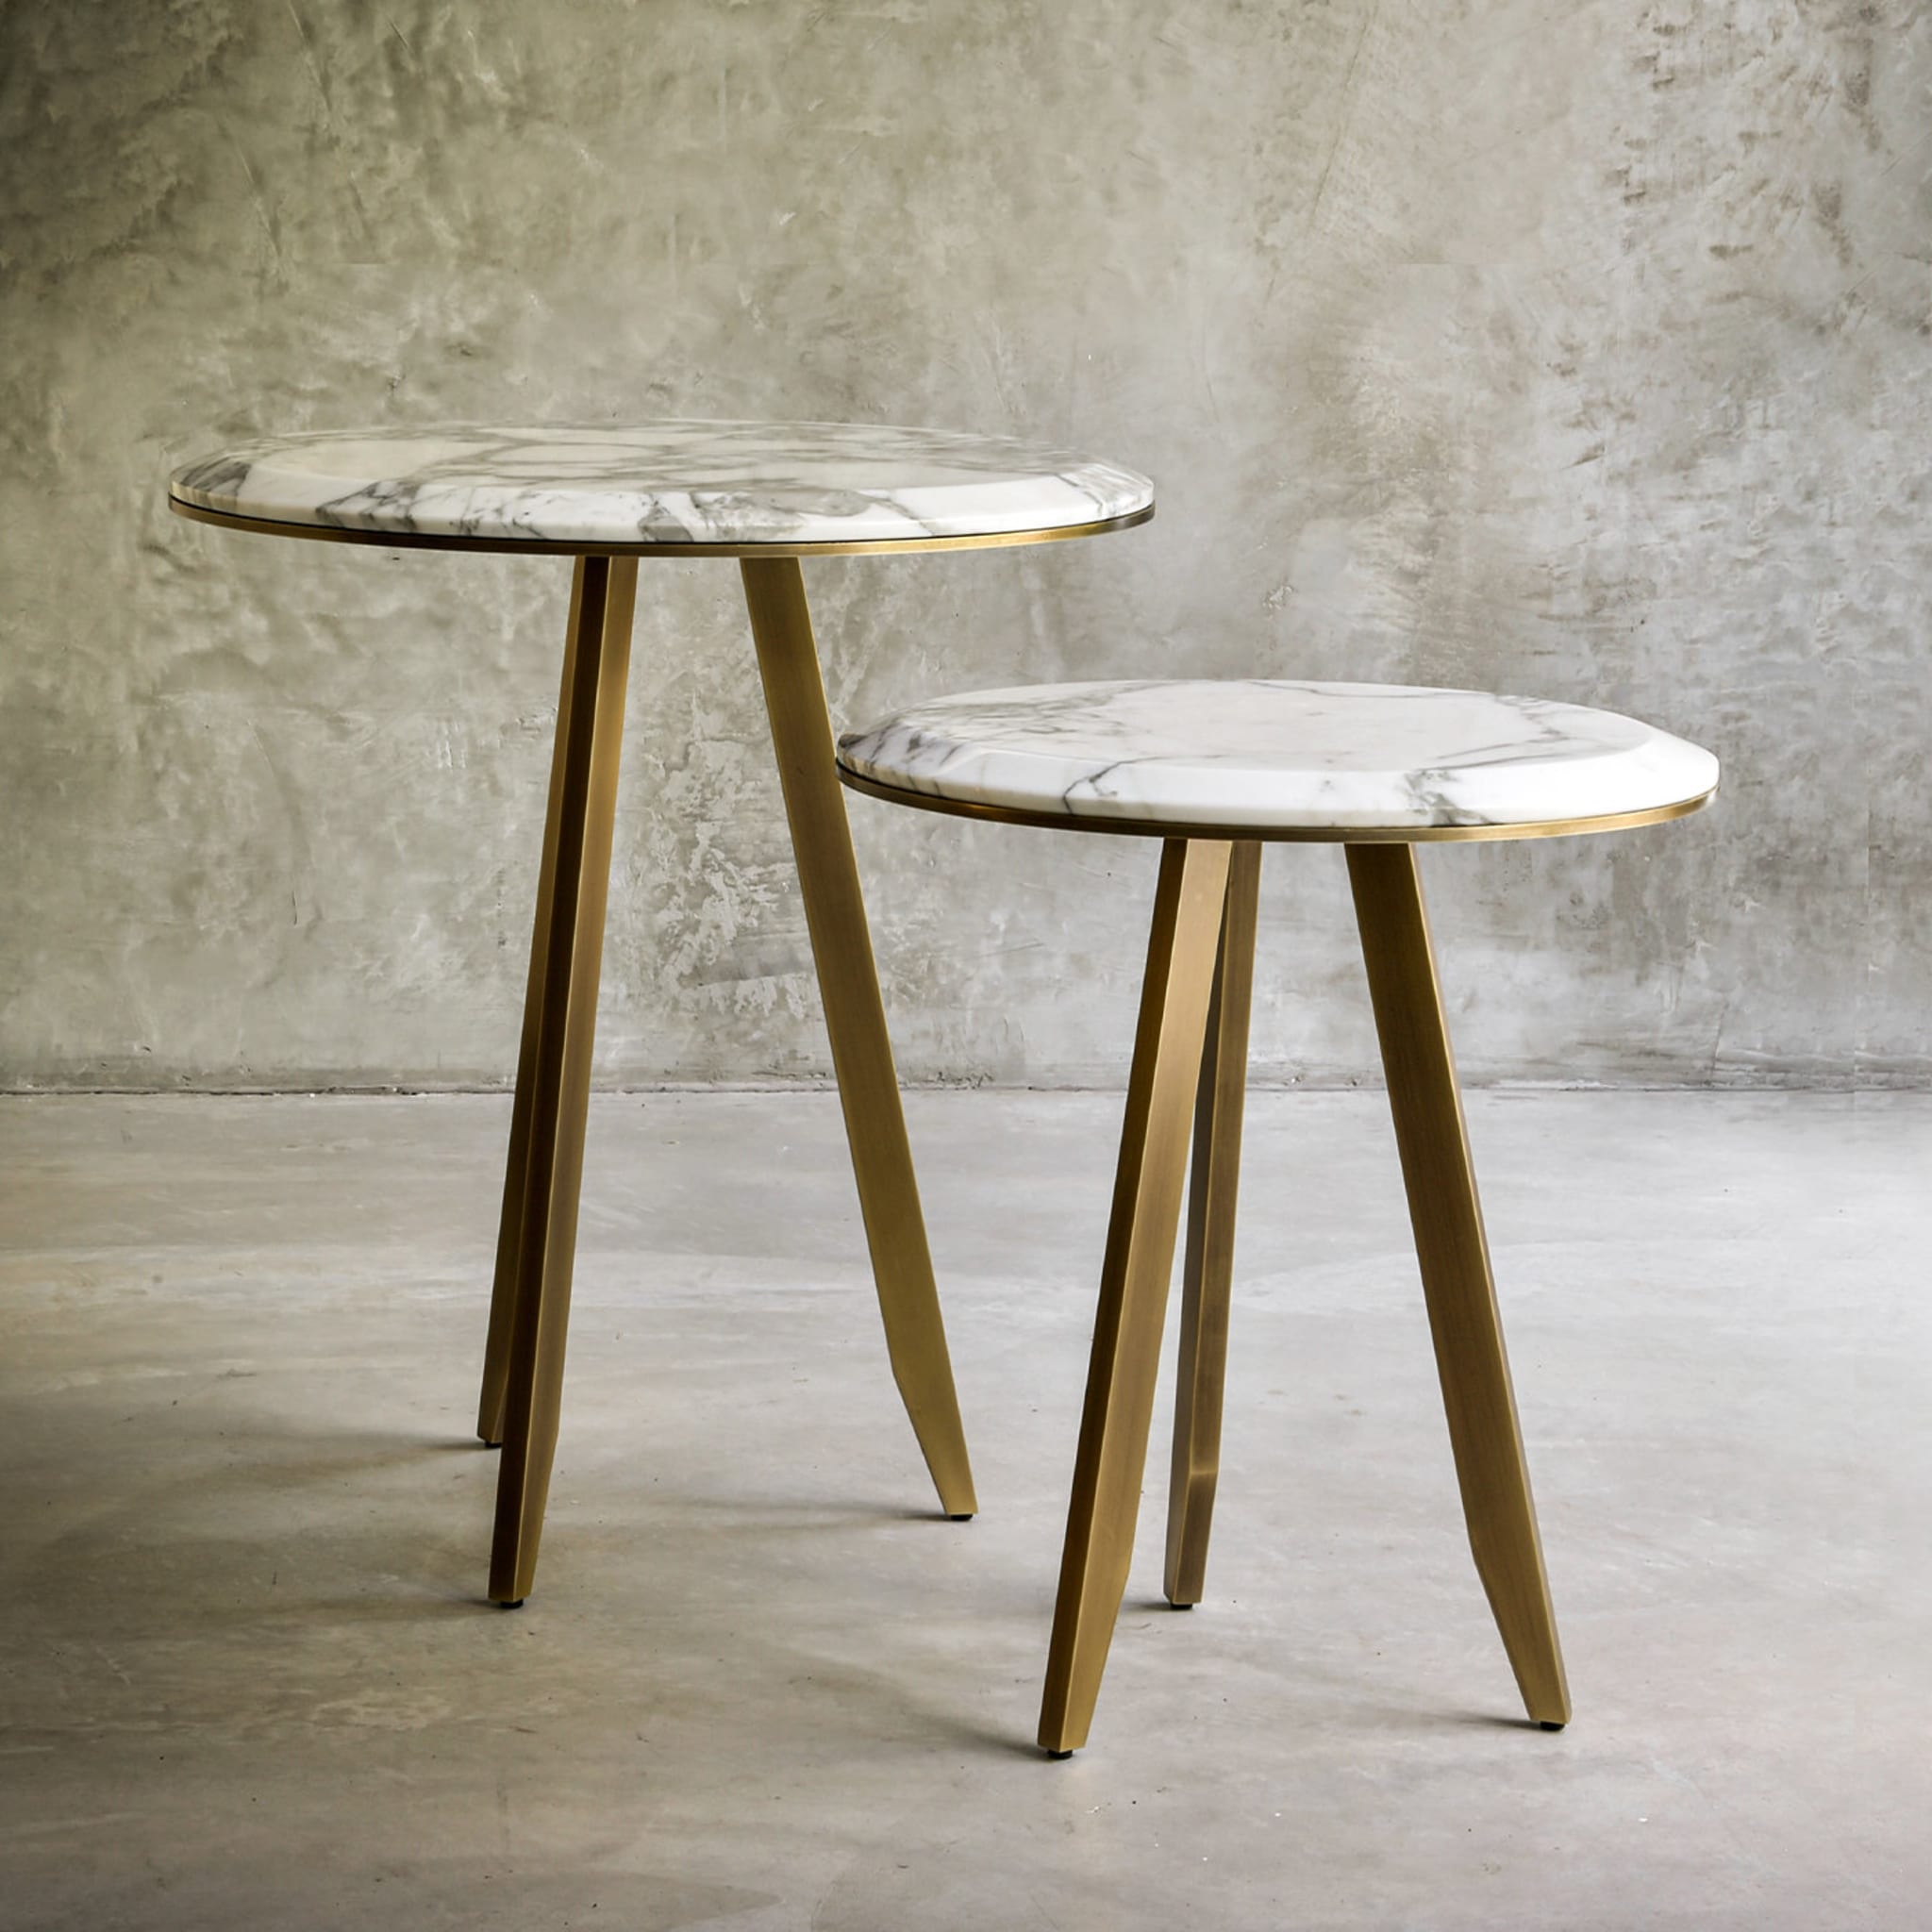 Mirage Large Side Table by Bosco Fair - Alternative view 1